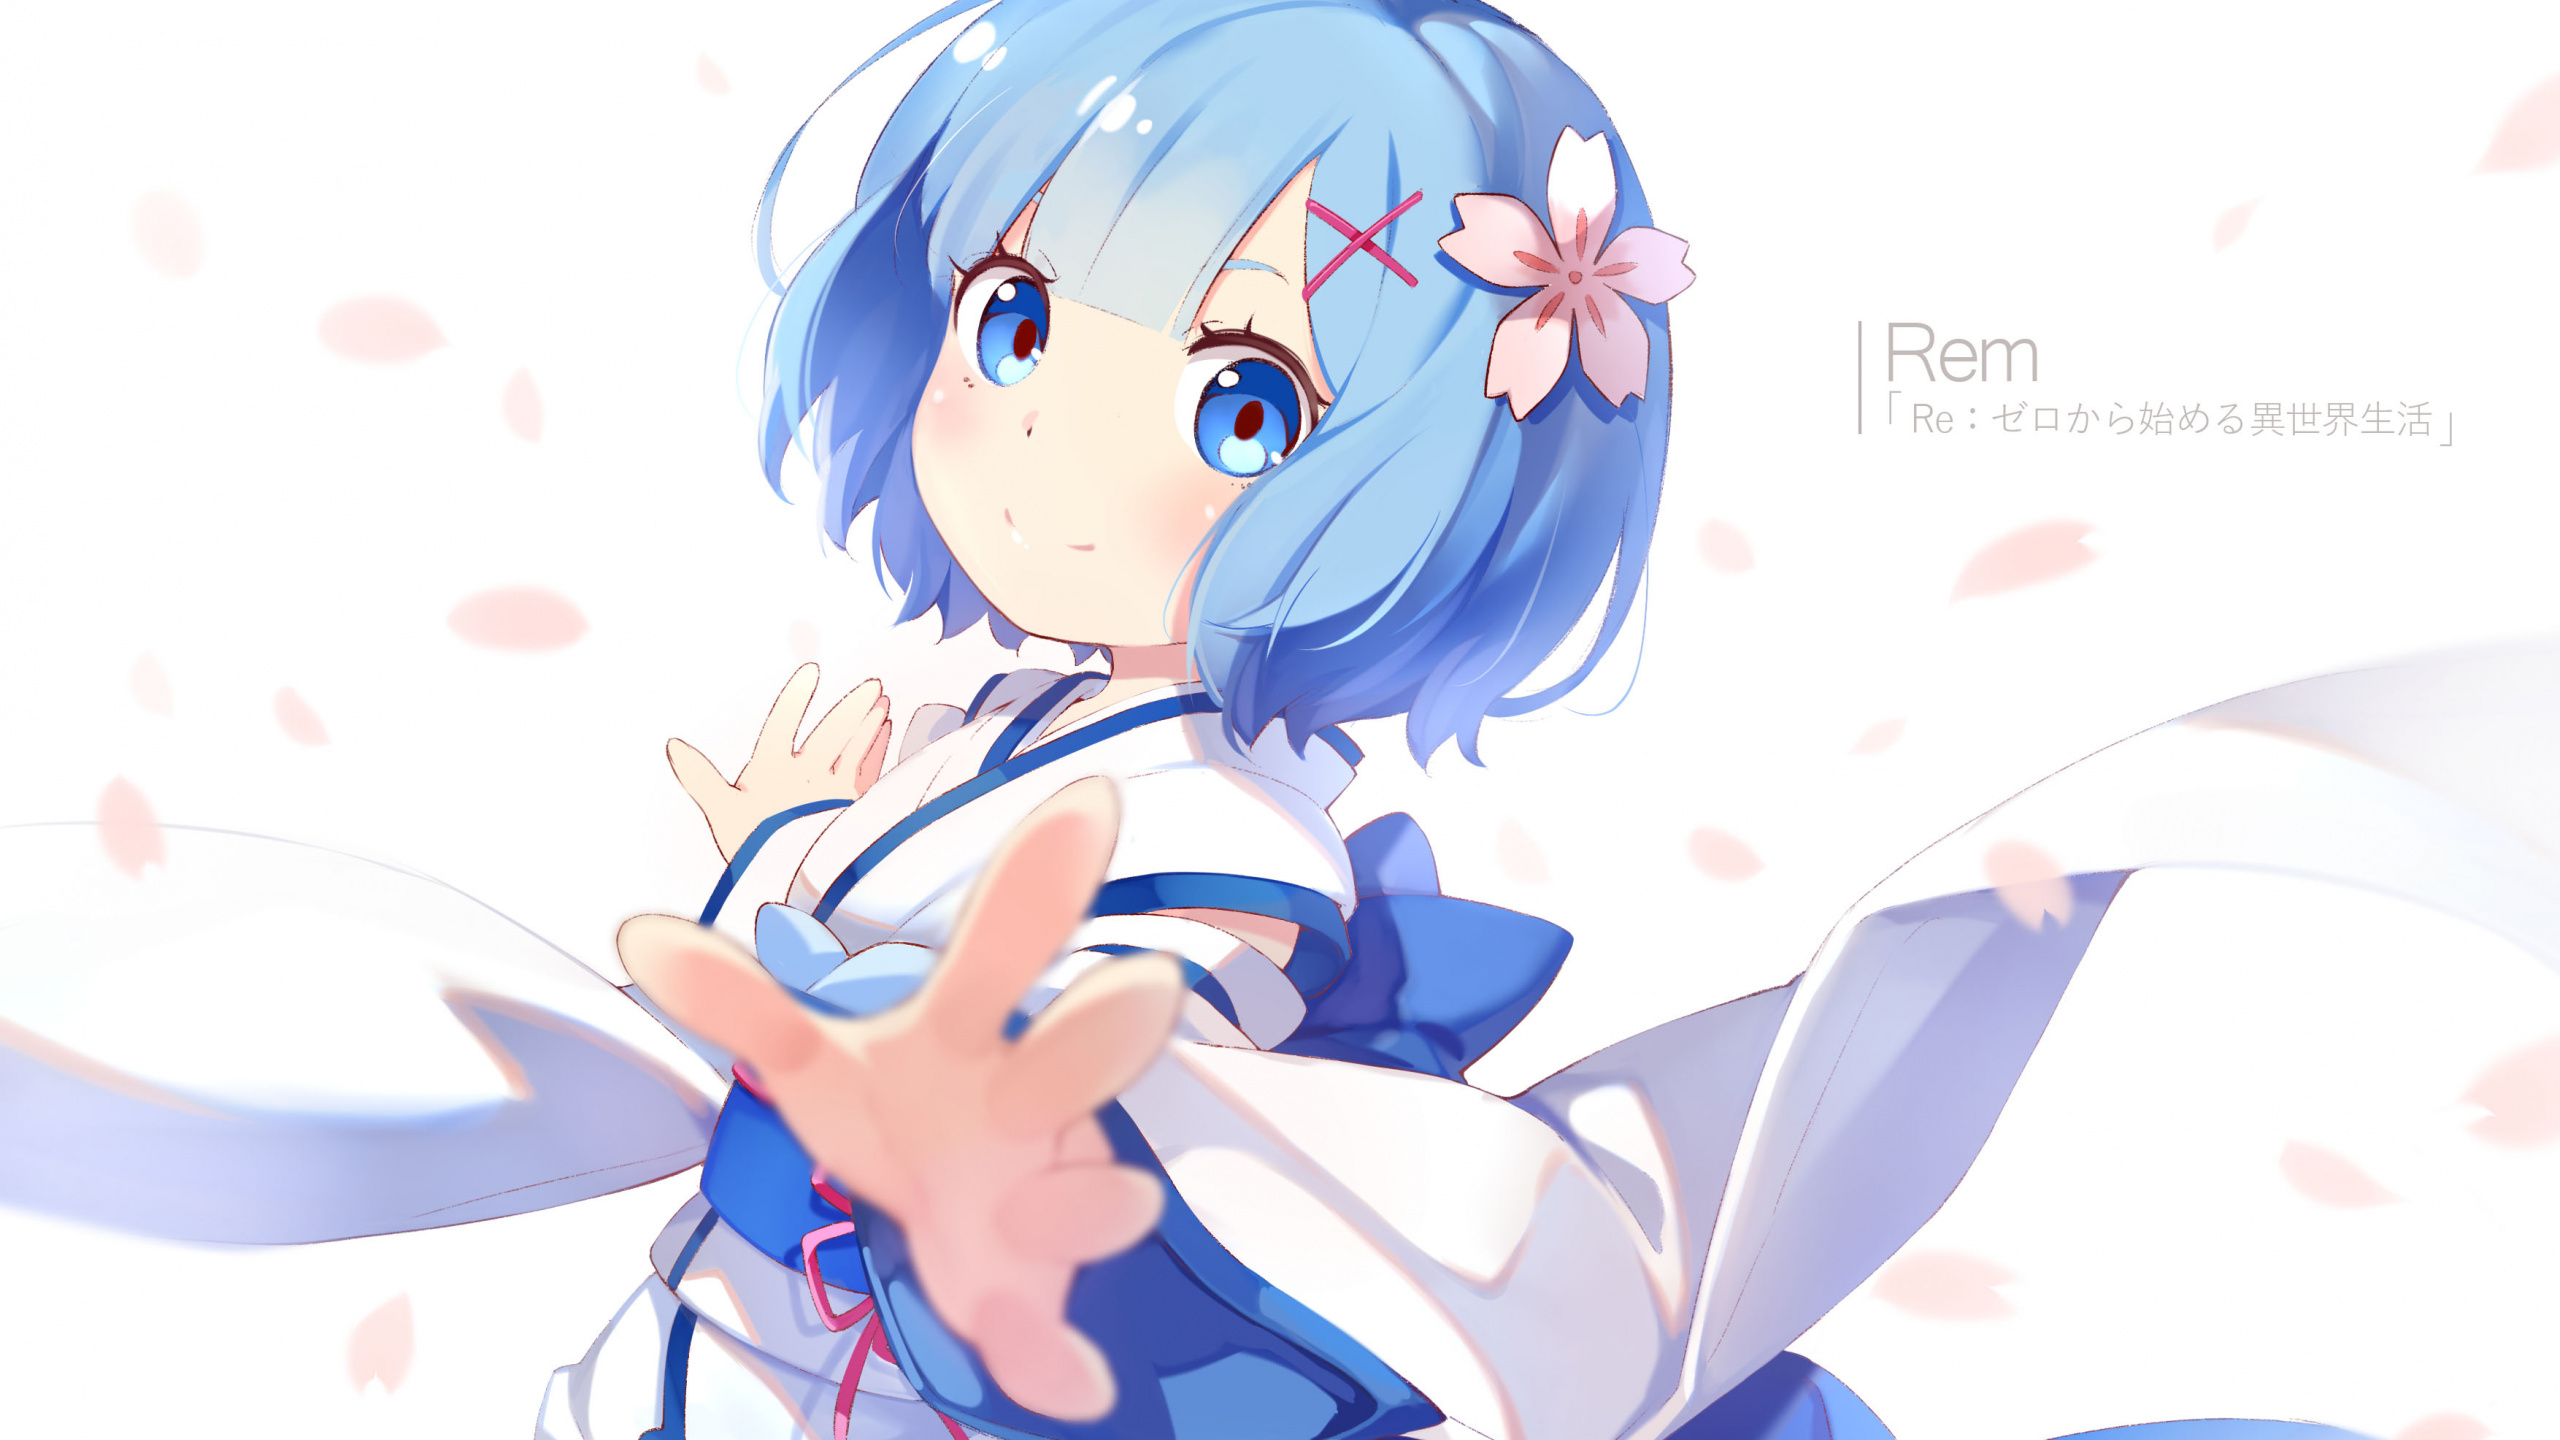 Girl in Blue Dress Anime Character. Wallpaper in 2560x1440 Resolution